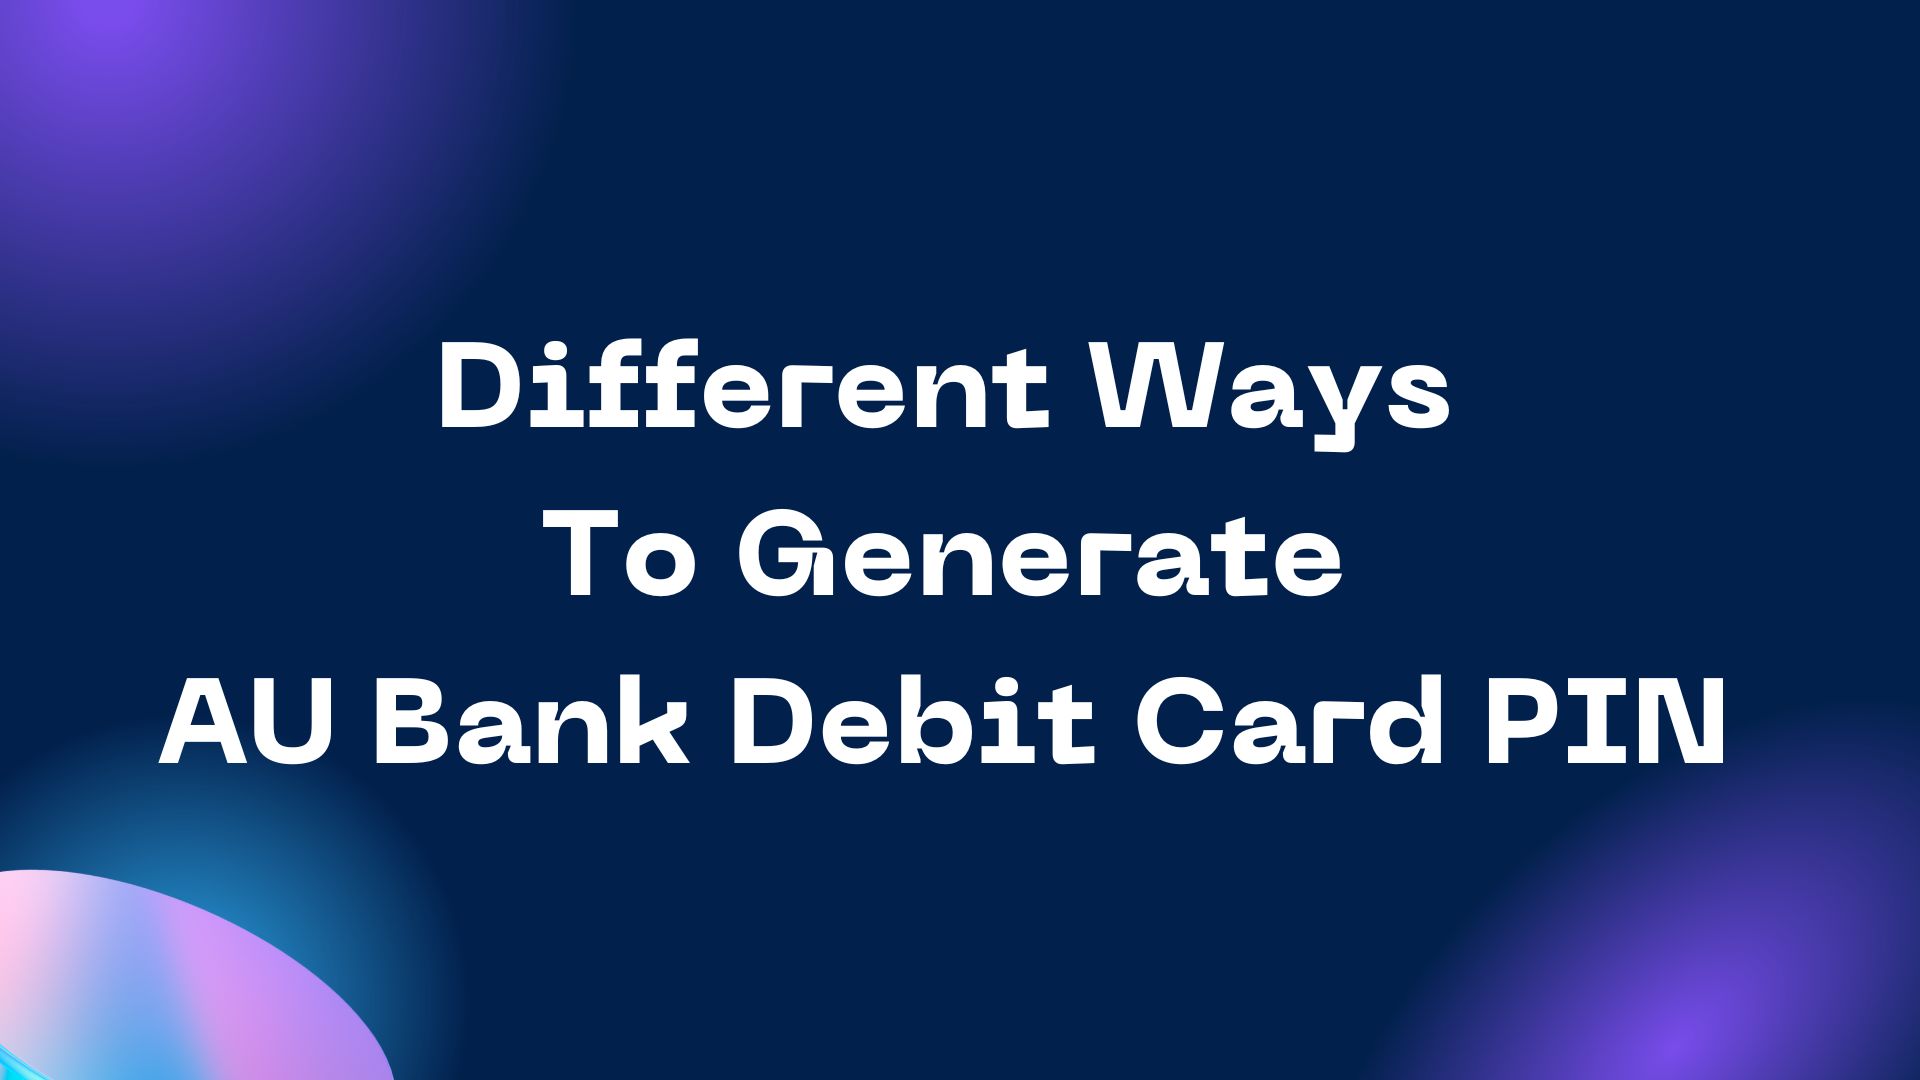 Different Ways To Generate AU Bank Debit Card PIN